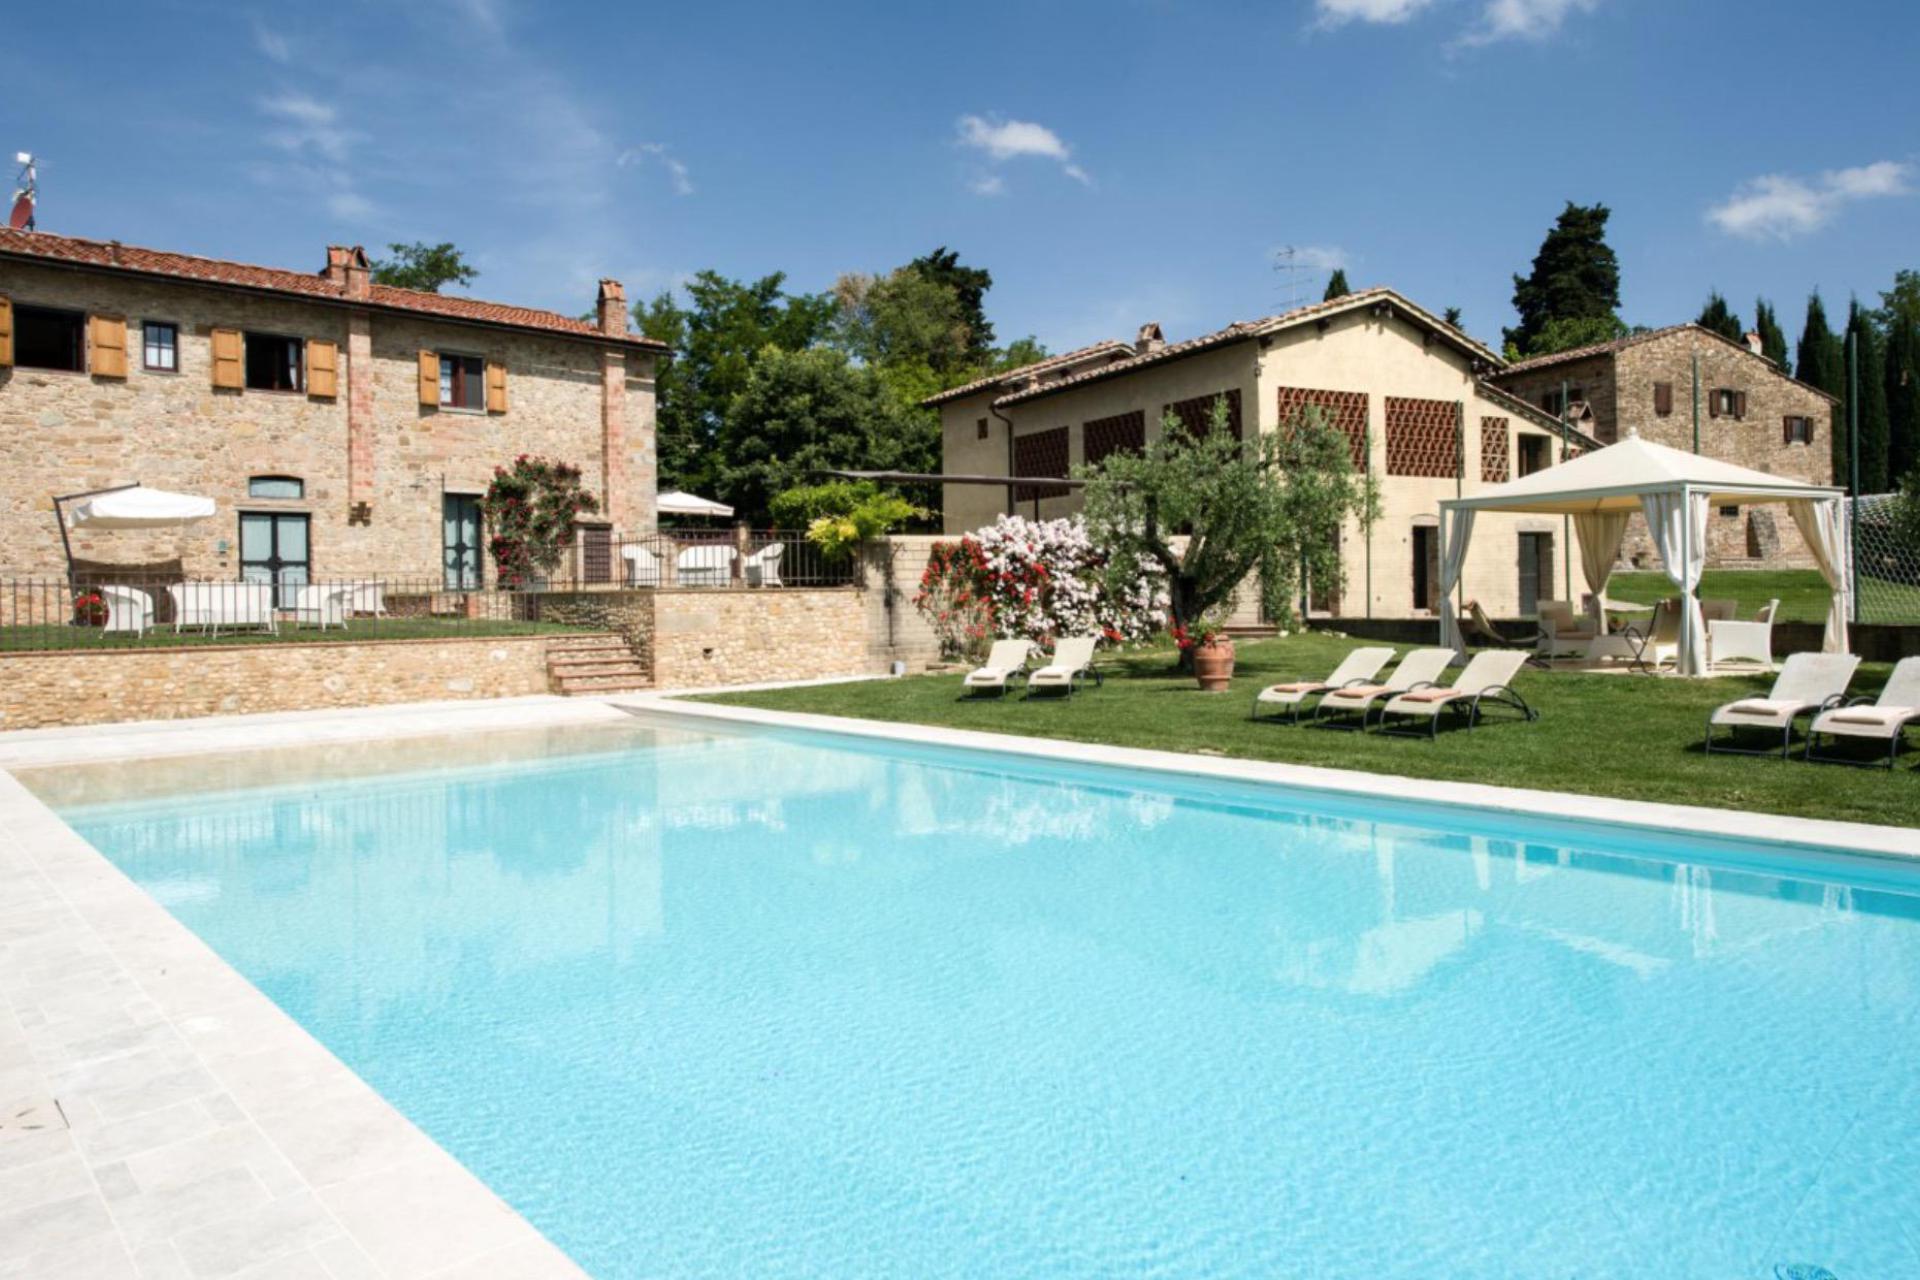 Agriturismi on a vineyard with many sports facilities in Tuscany